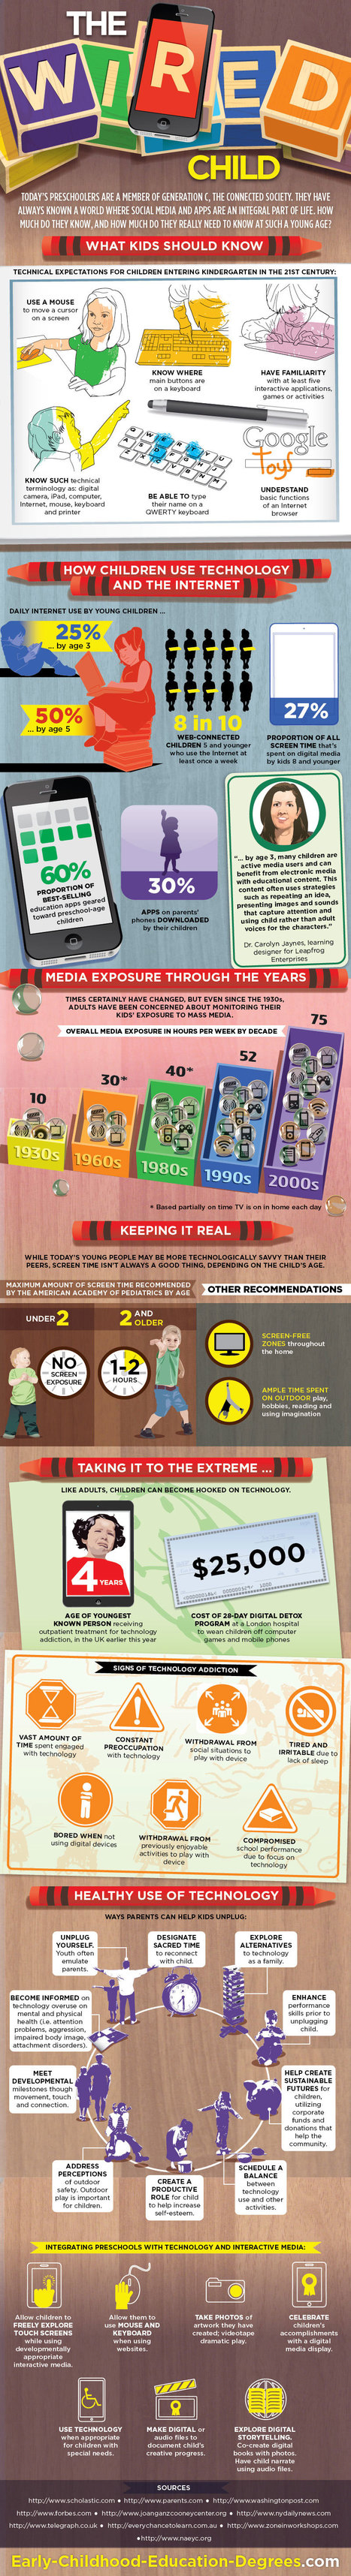 The Complete Visual Guide To Technology For Children [Infographic] | maestro Julio | Scoop.it